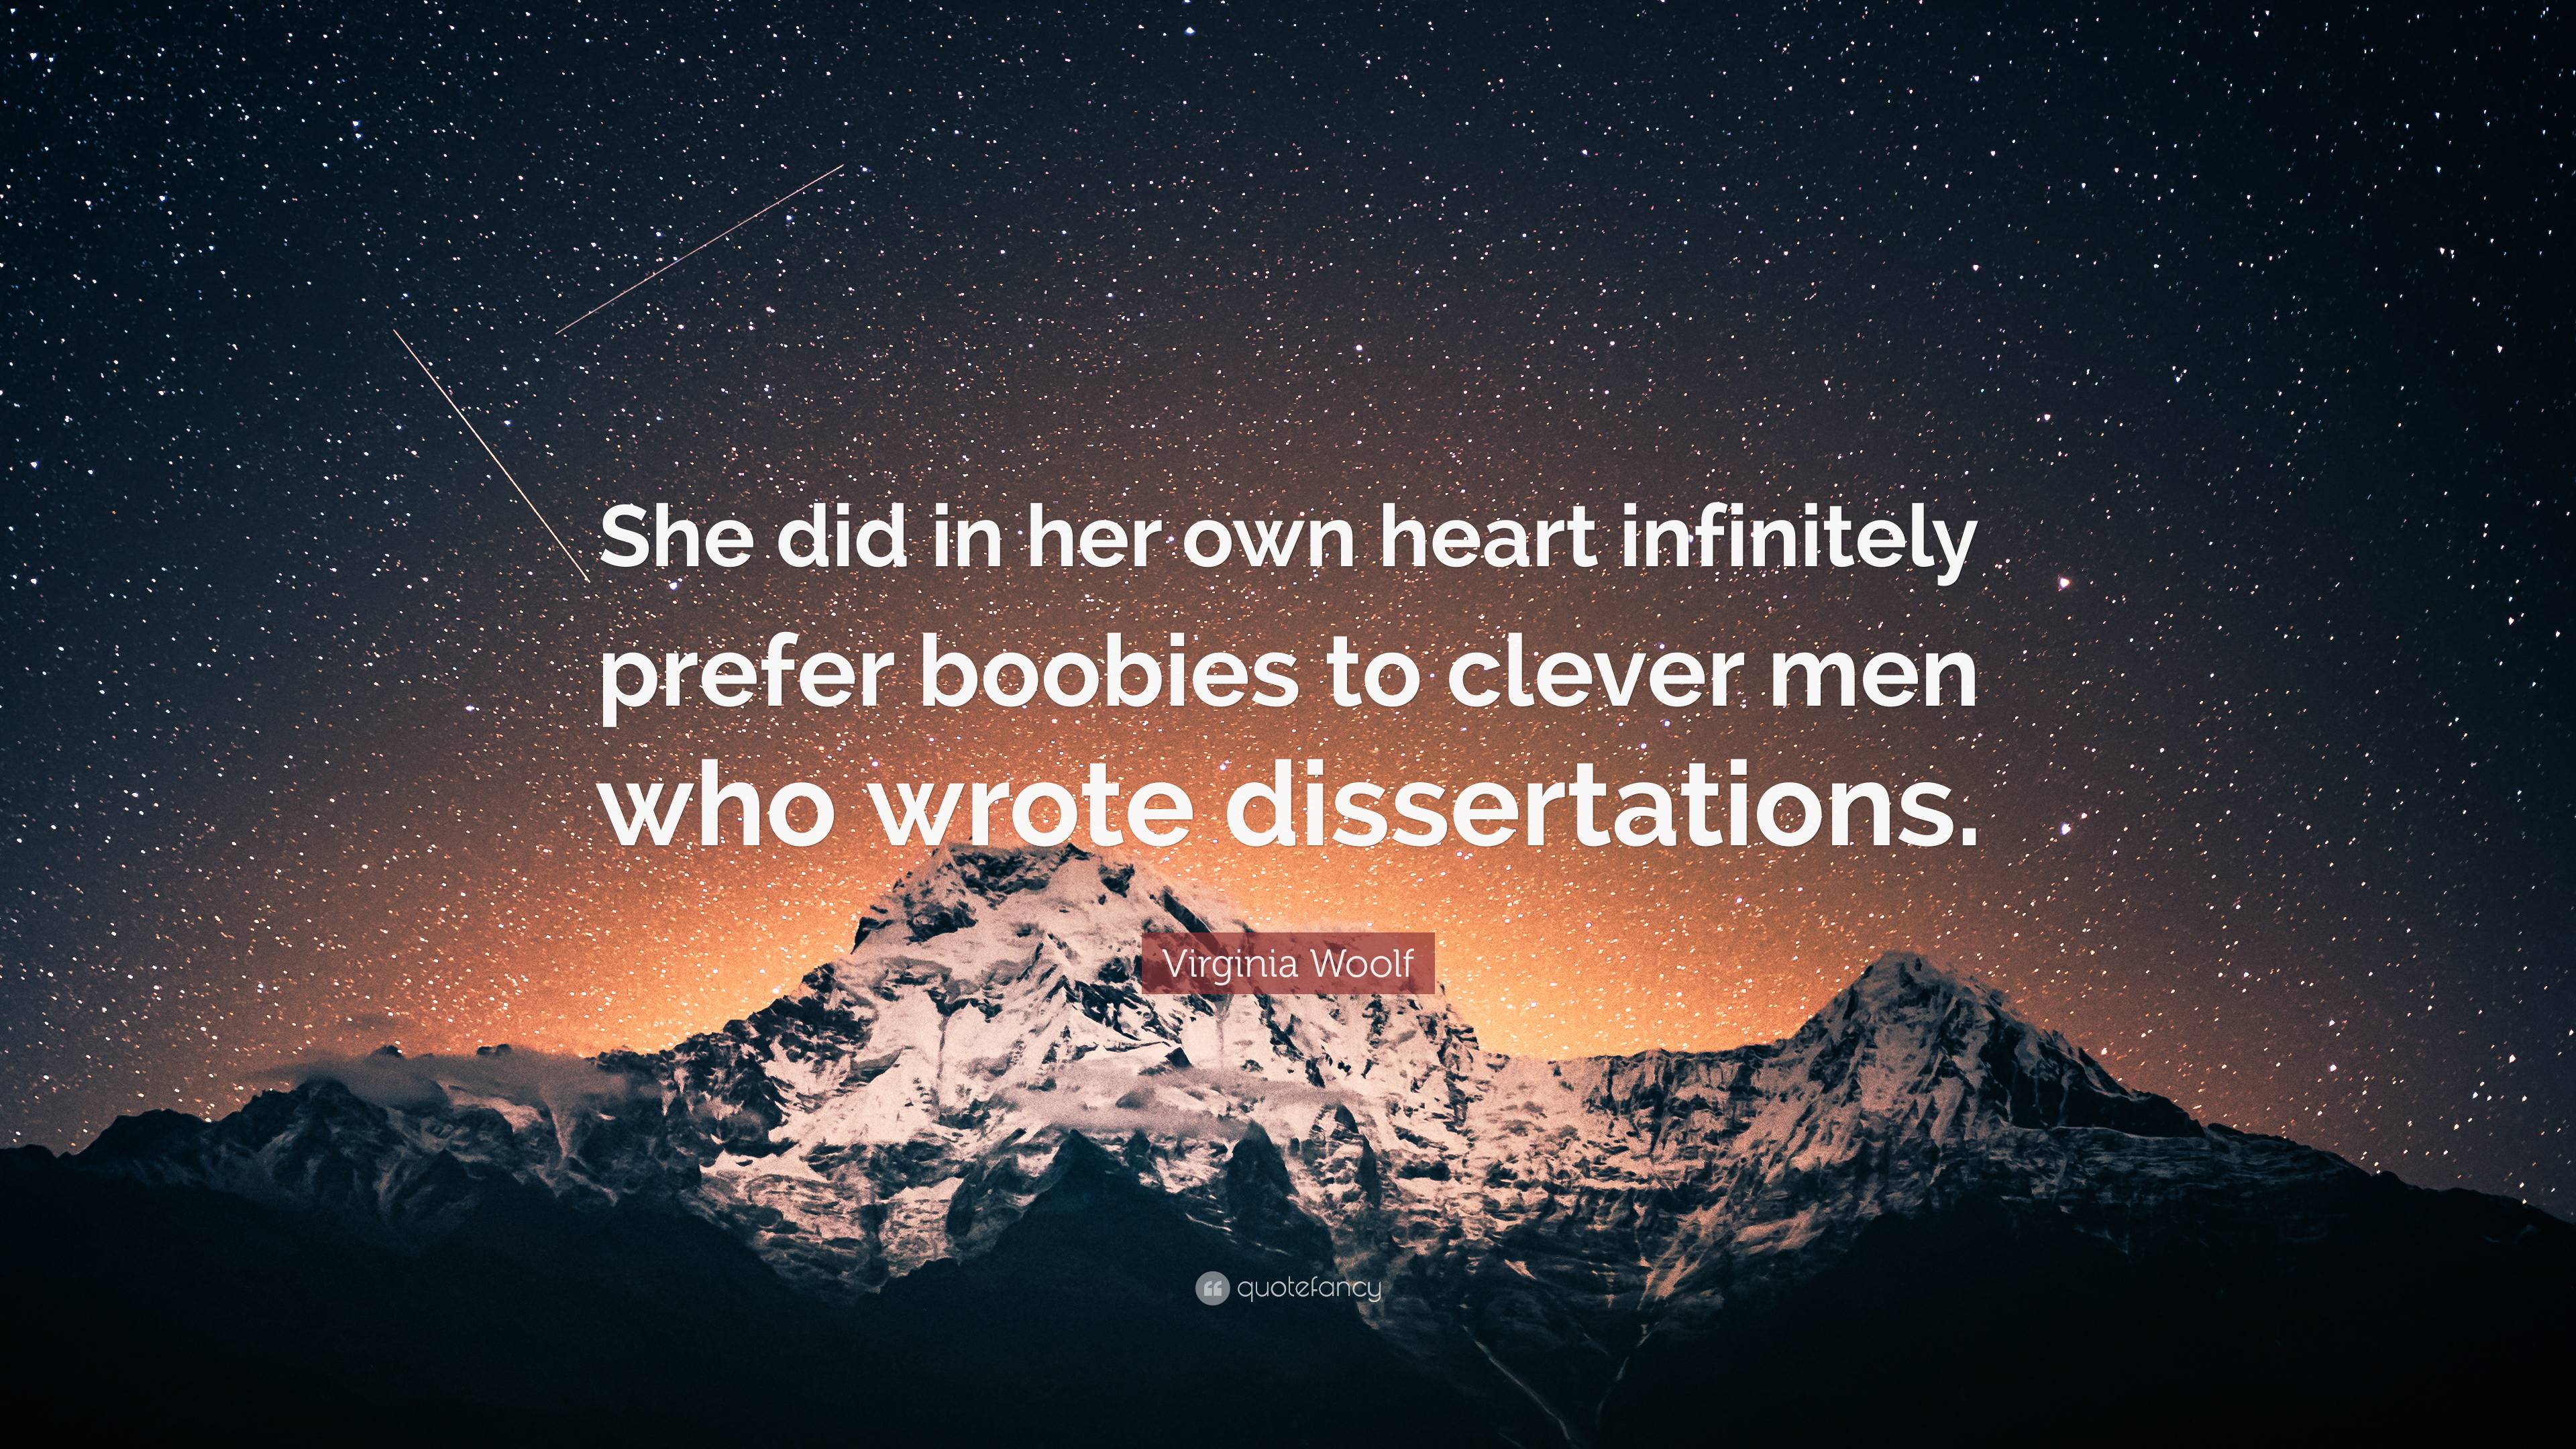 Because doves are totally what come to mind when one thinks of boobs :  r/menwritingwomen